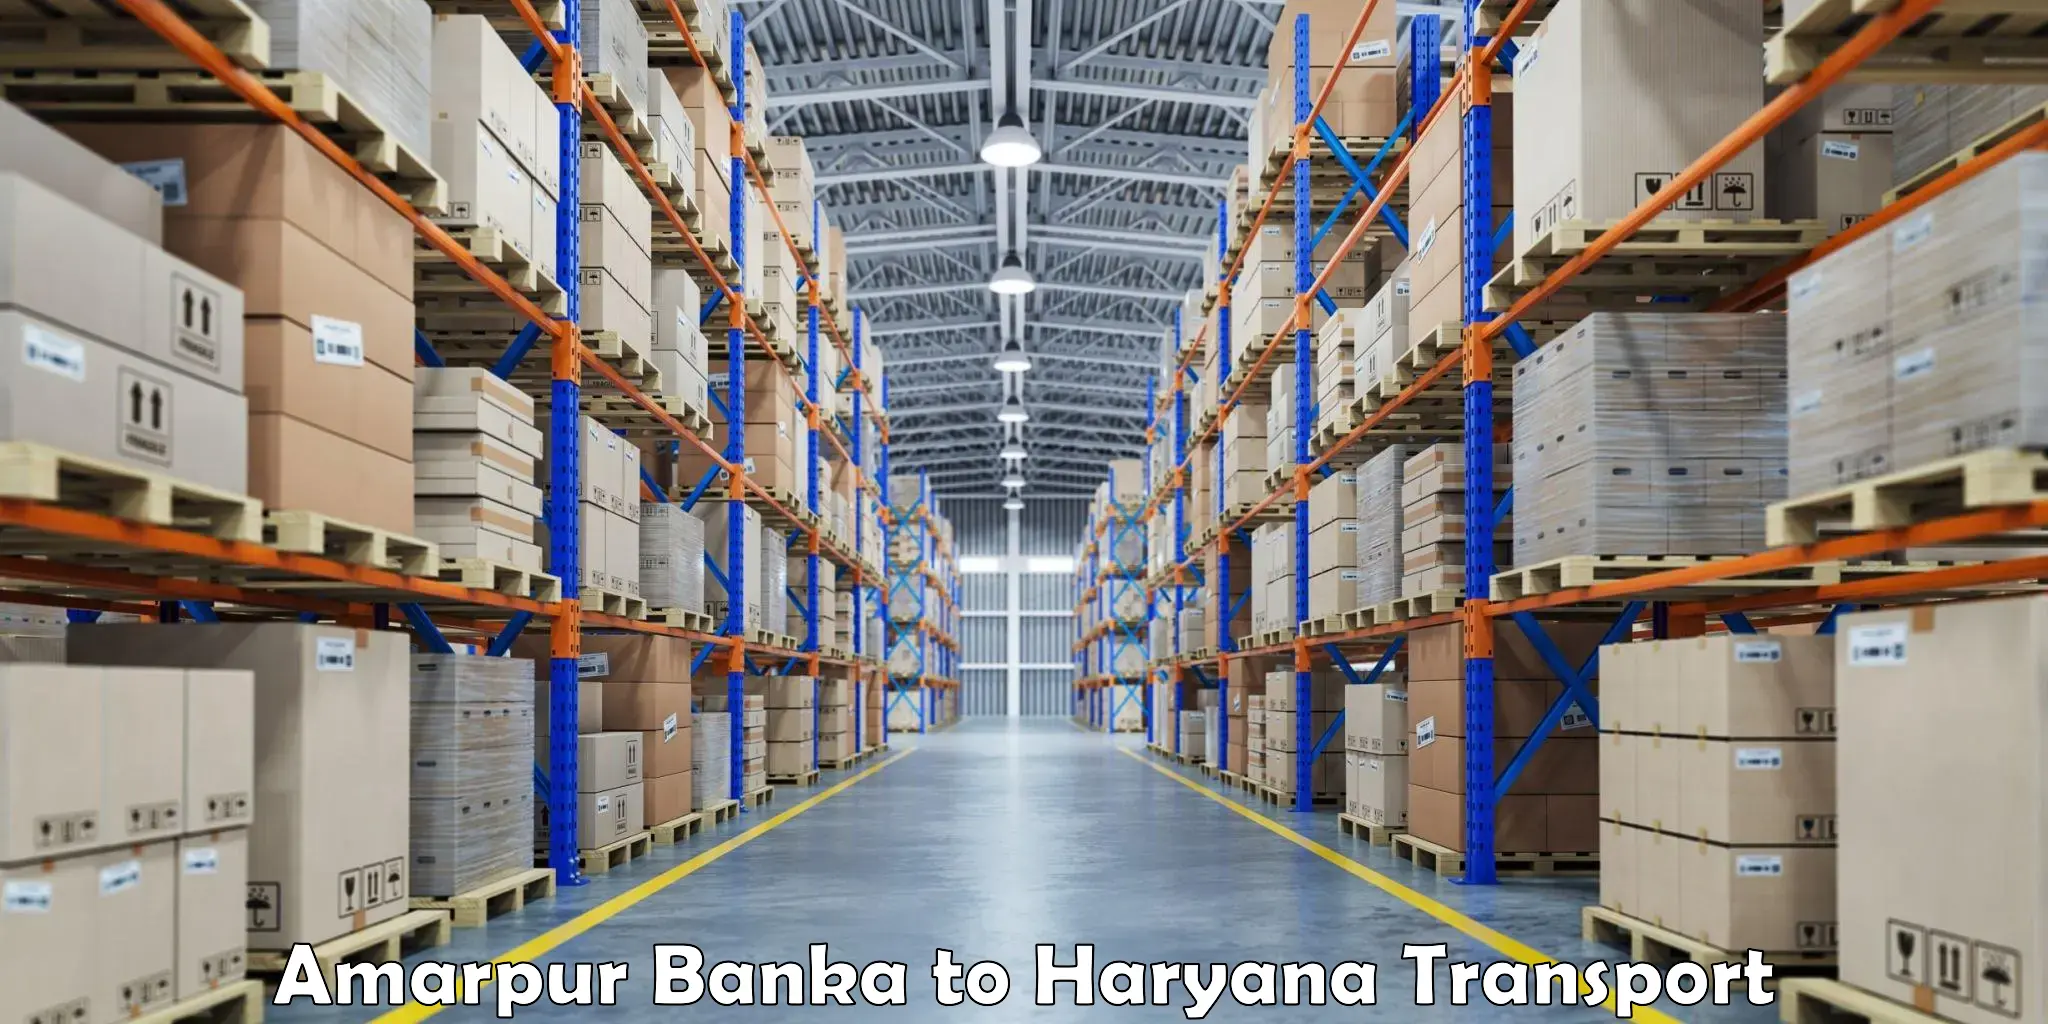 Vehicle transport services in Amarpur Banka to Sohna